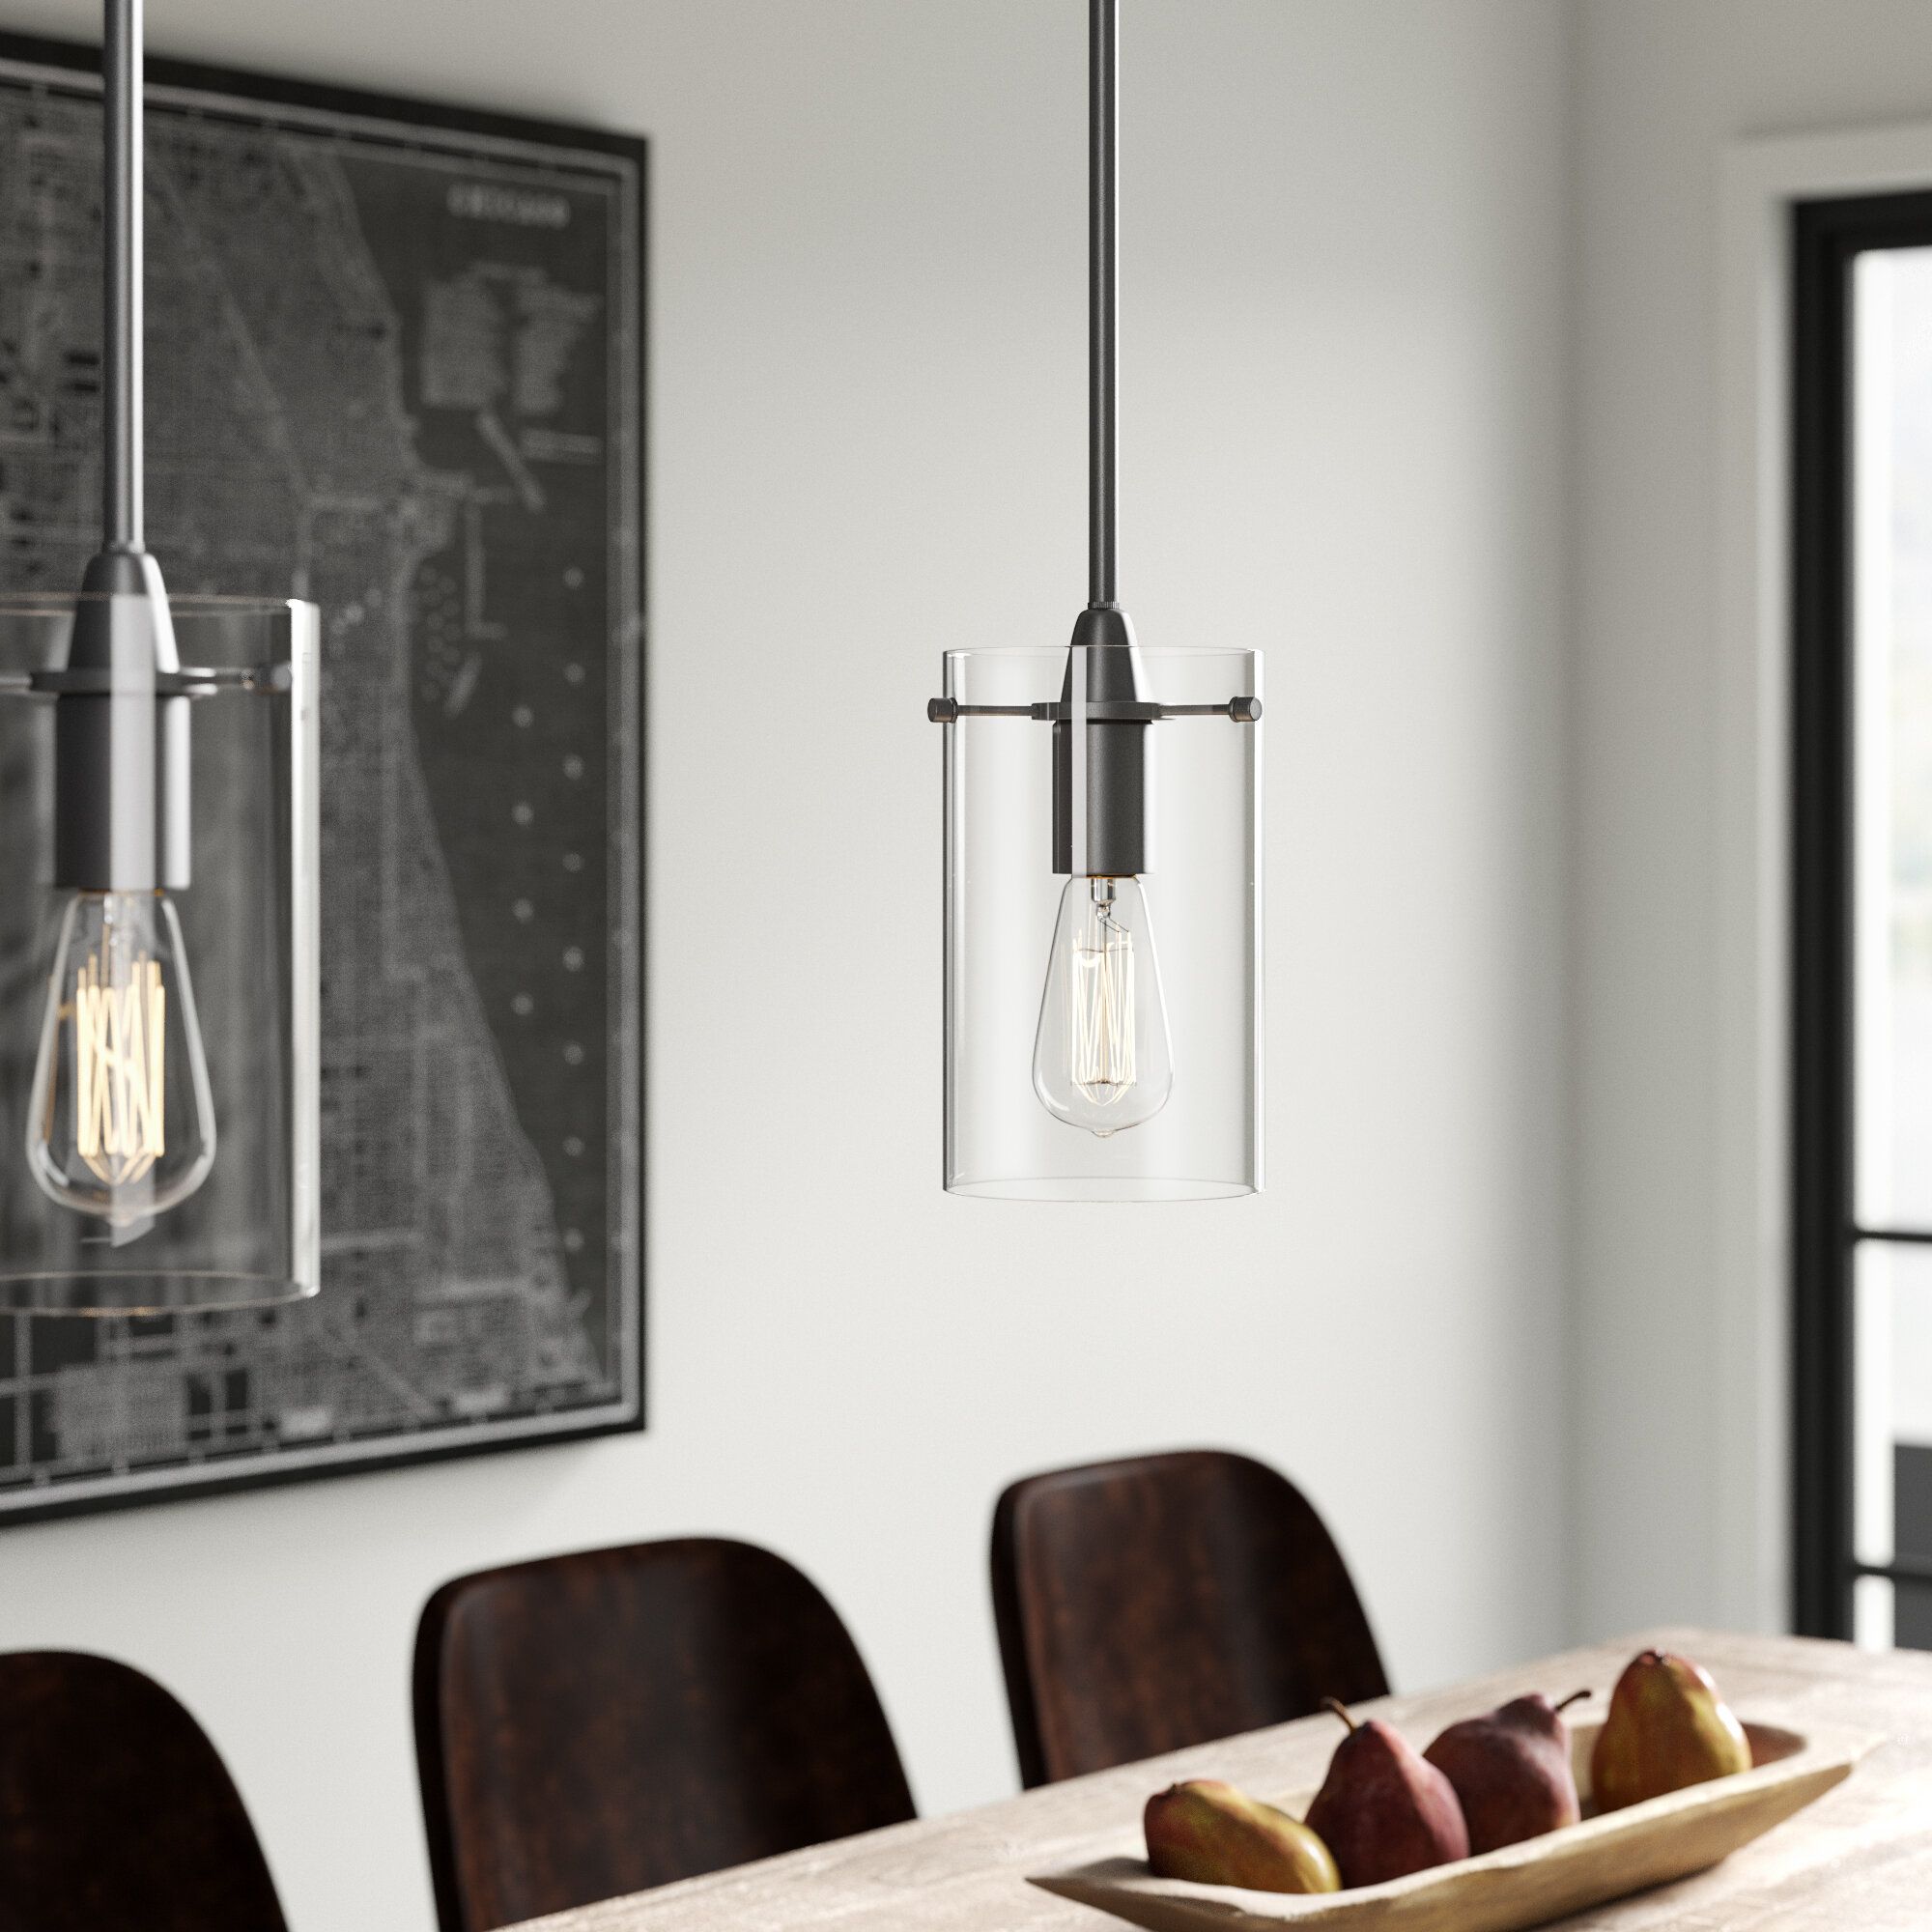 Farmhouse & Rustic Cylinder Pendants | Birch Lane Intended For Oldbury 1 Light Single Cylinder Pendants (View 23 of 30)